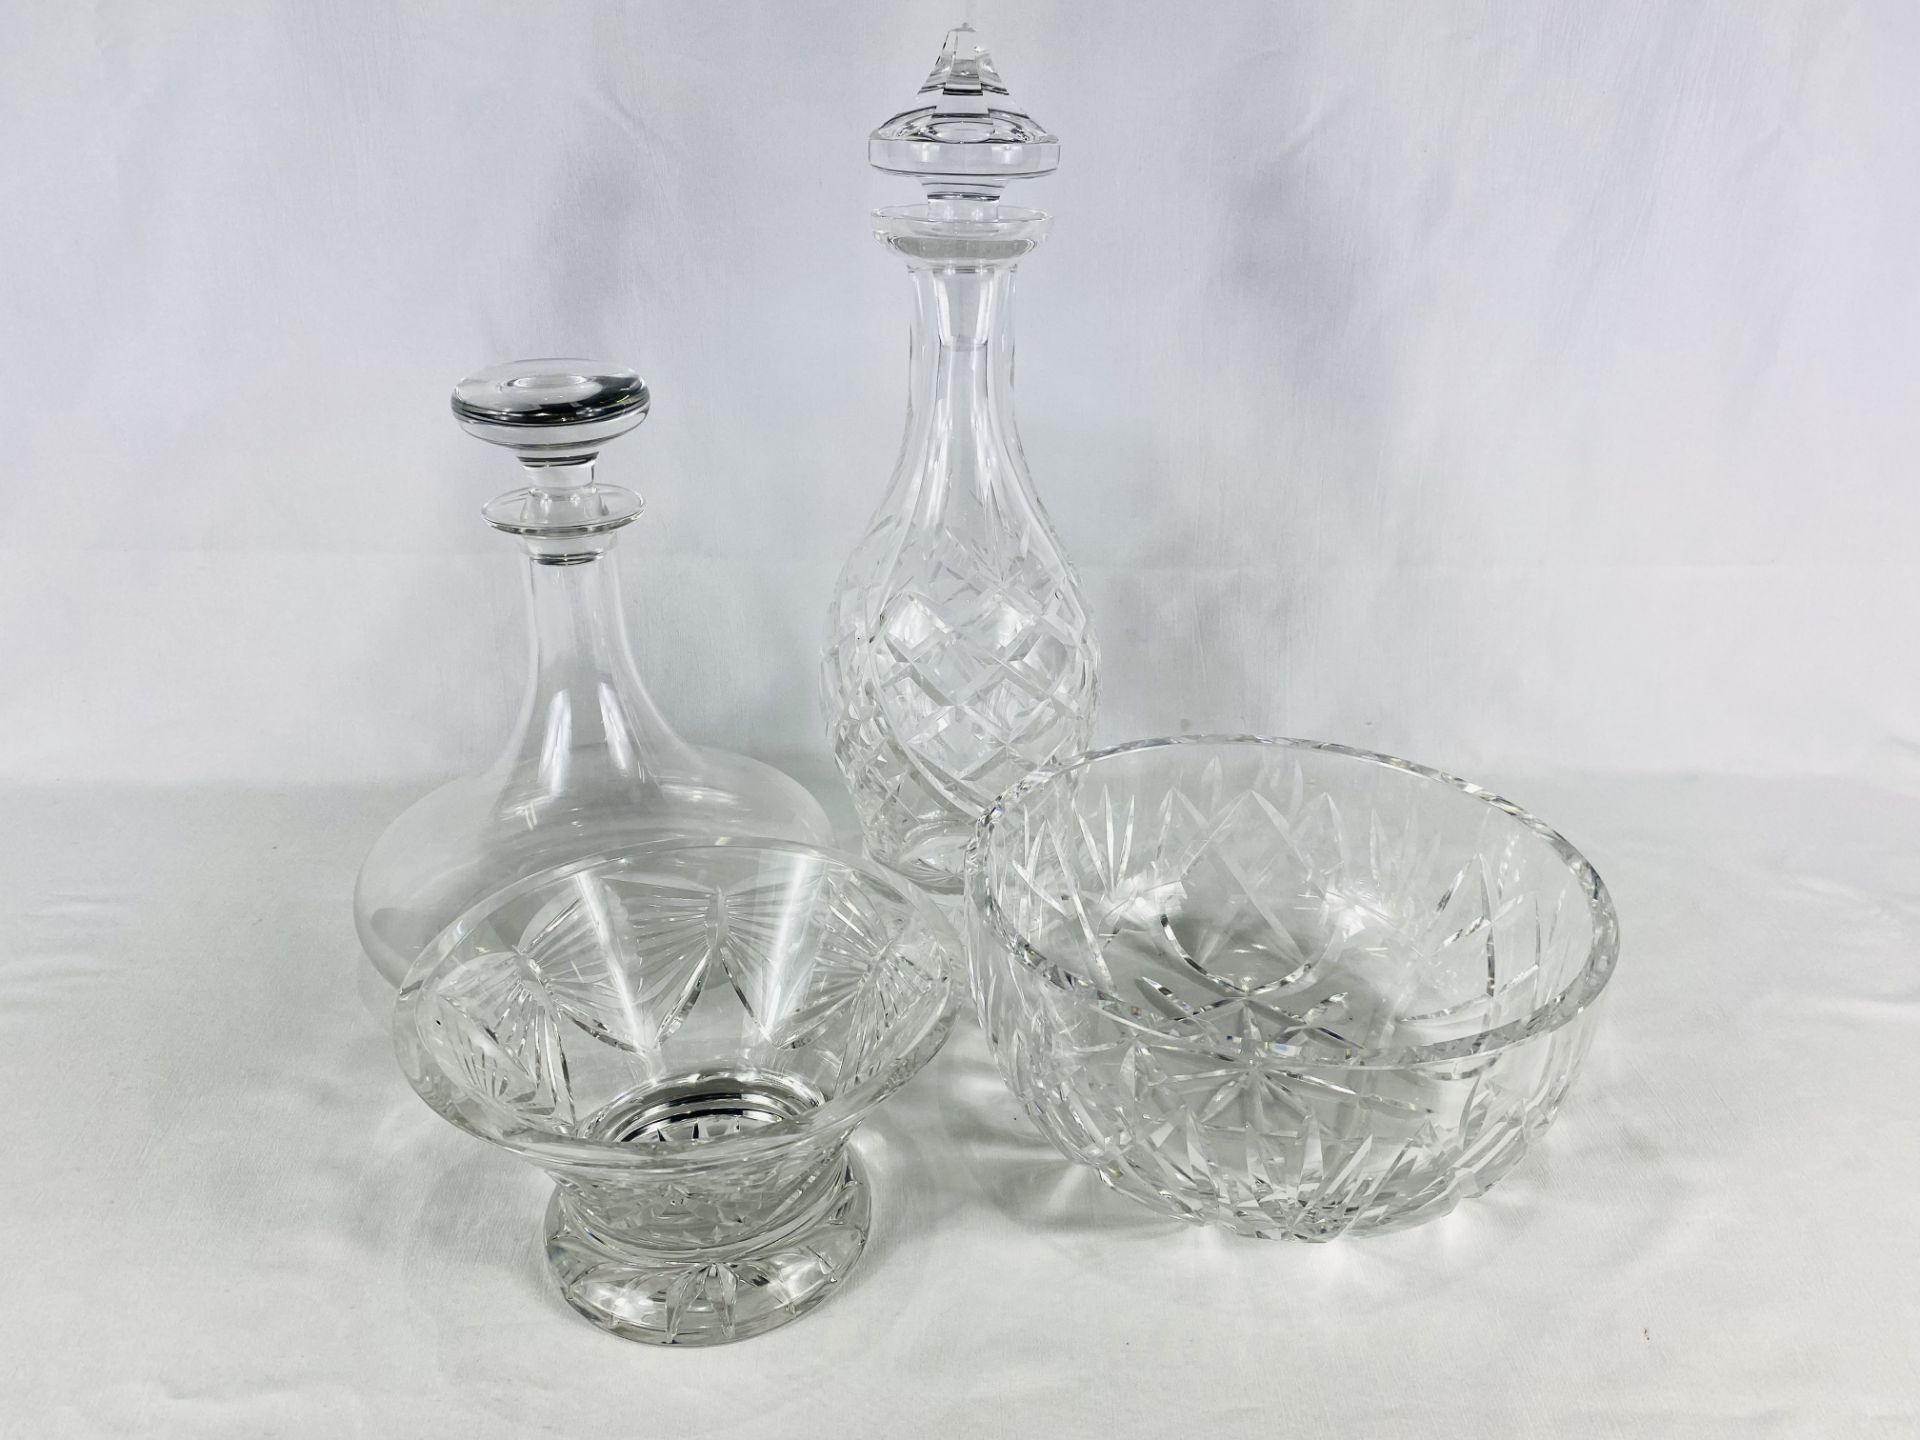 Two Waterford crystal bowl, a Waterford decanter and one other